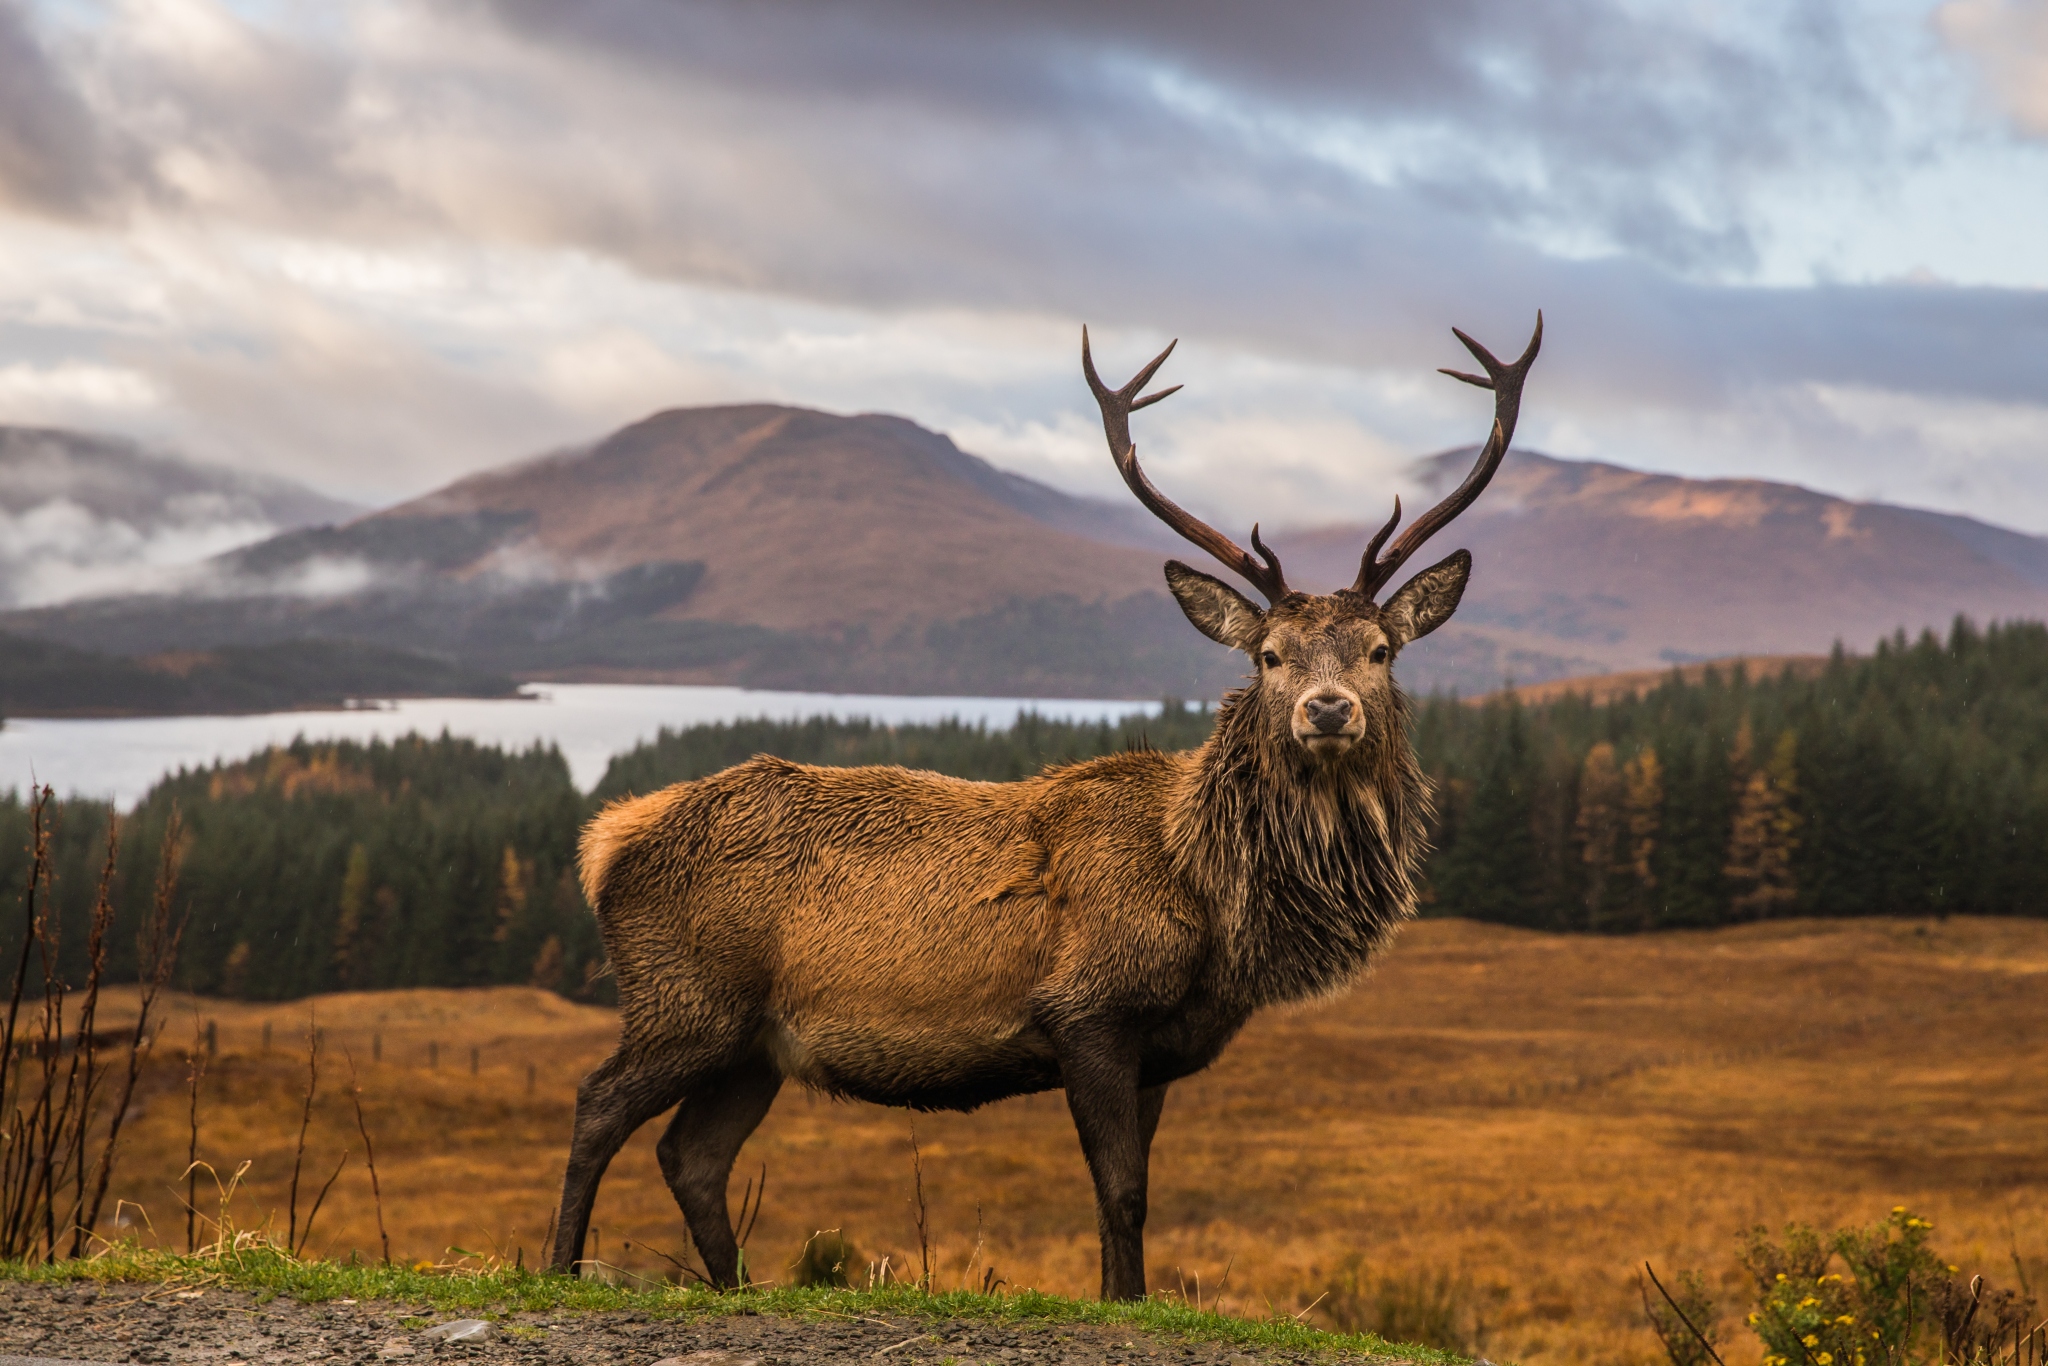 History of the Legendary Scottish Stag